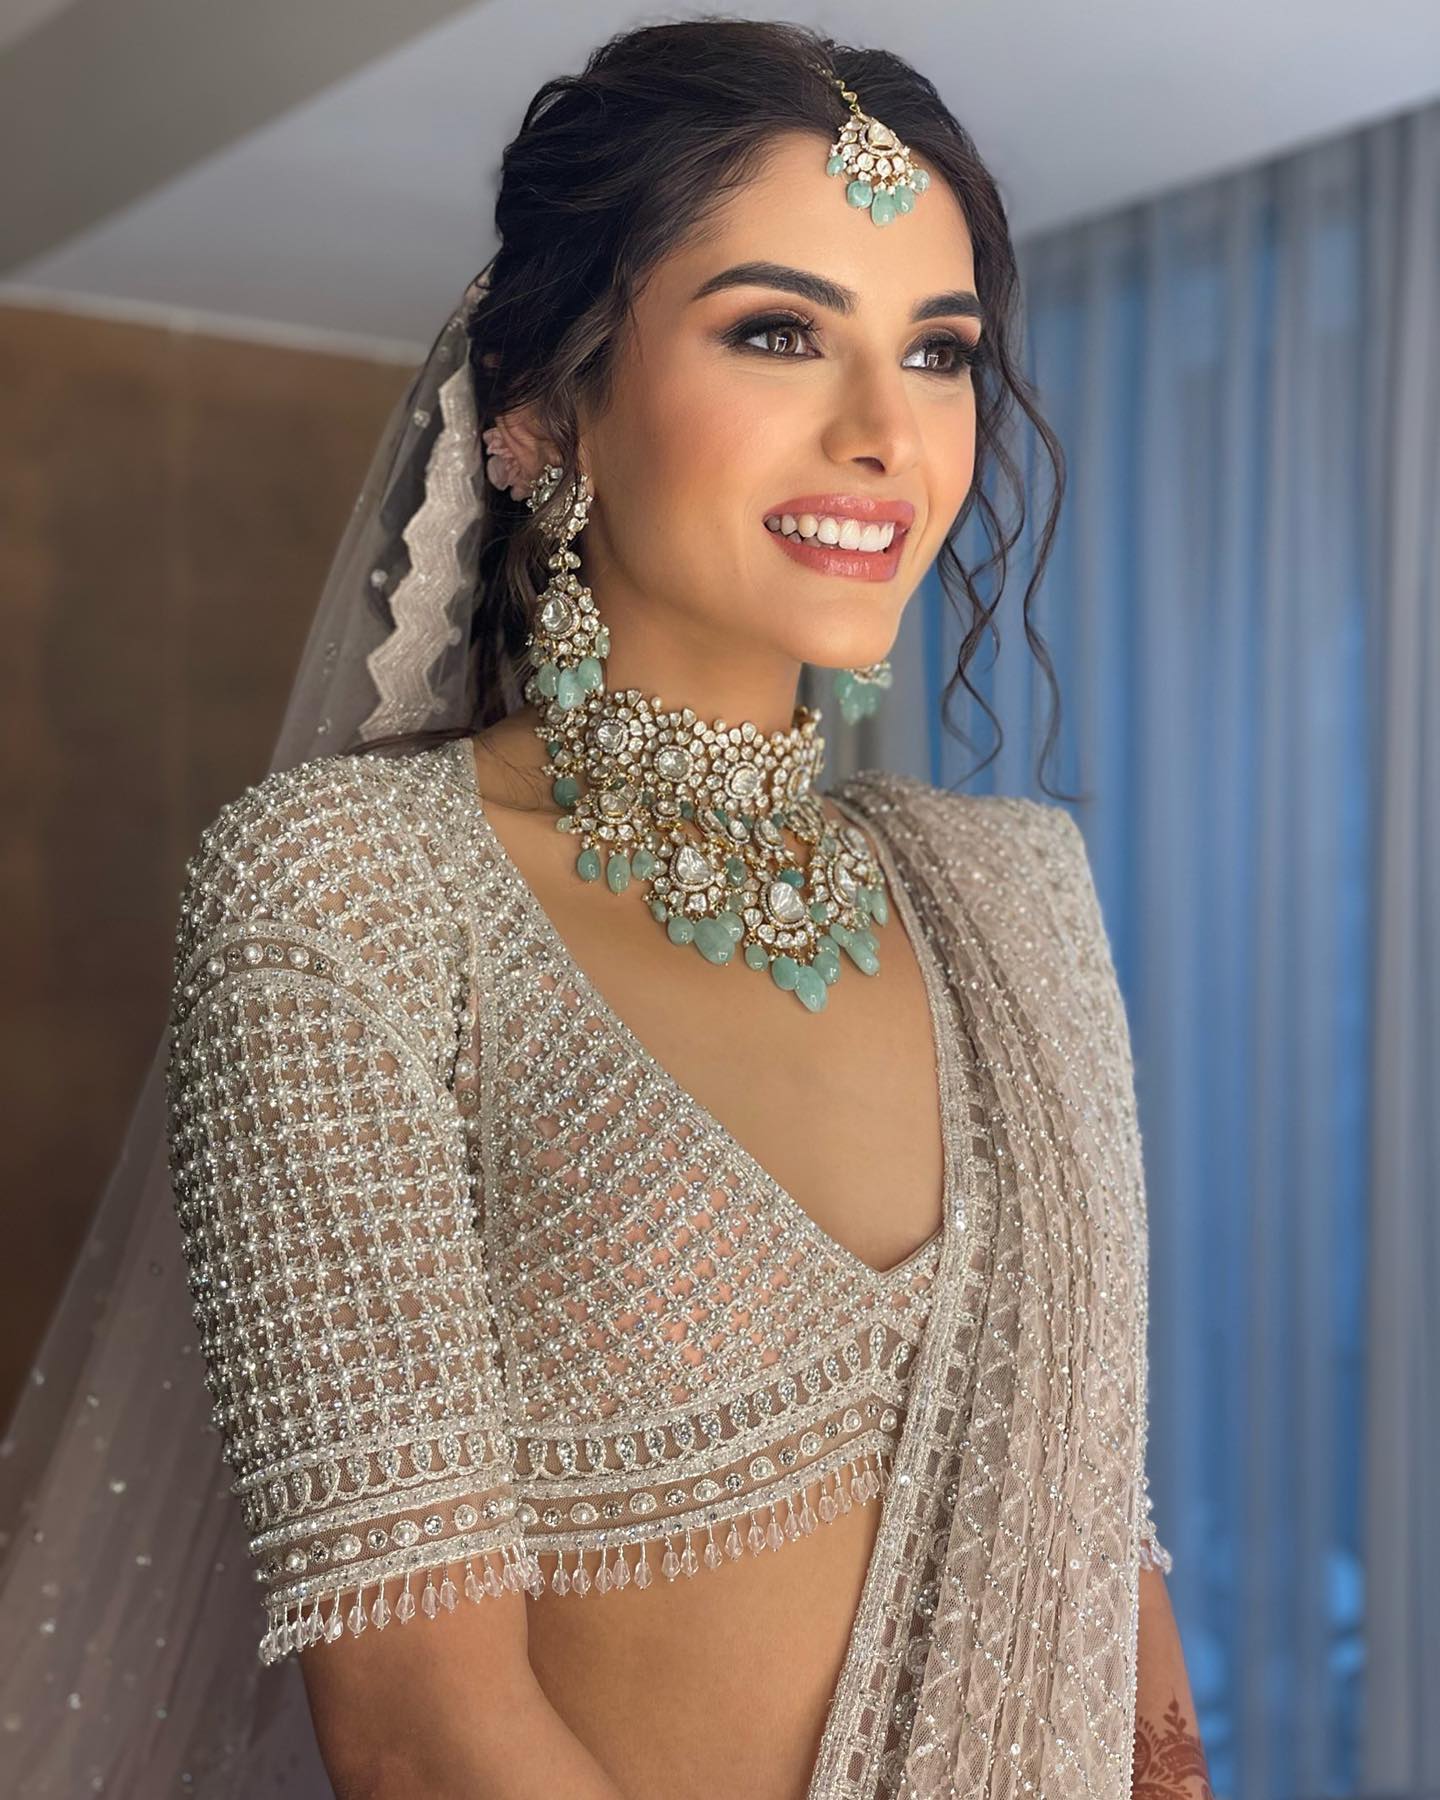 10 tips to choose the perfect bridal jewelry for your Walima and Nikkah